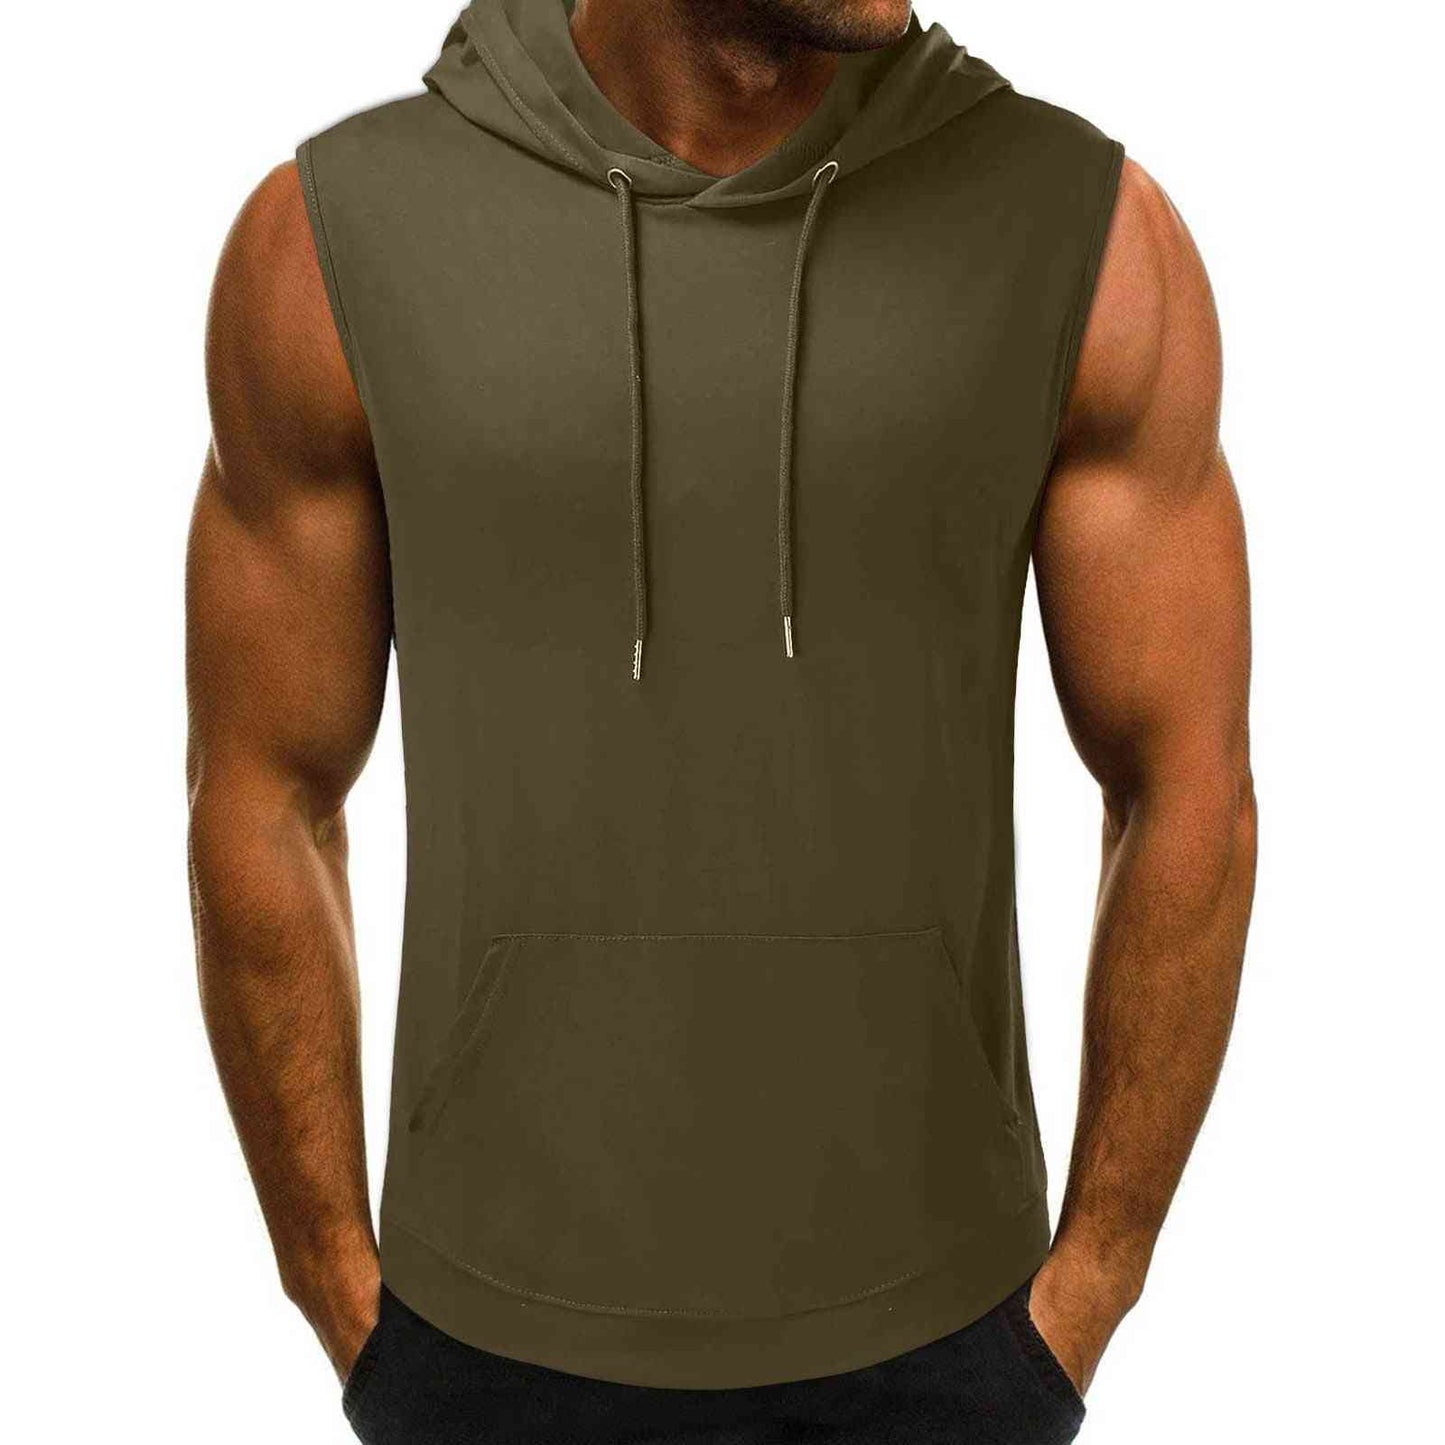 Men's Sleeveless Tank Top - Trotters Independent Traders